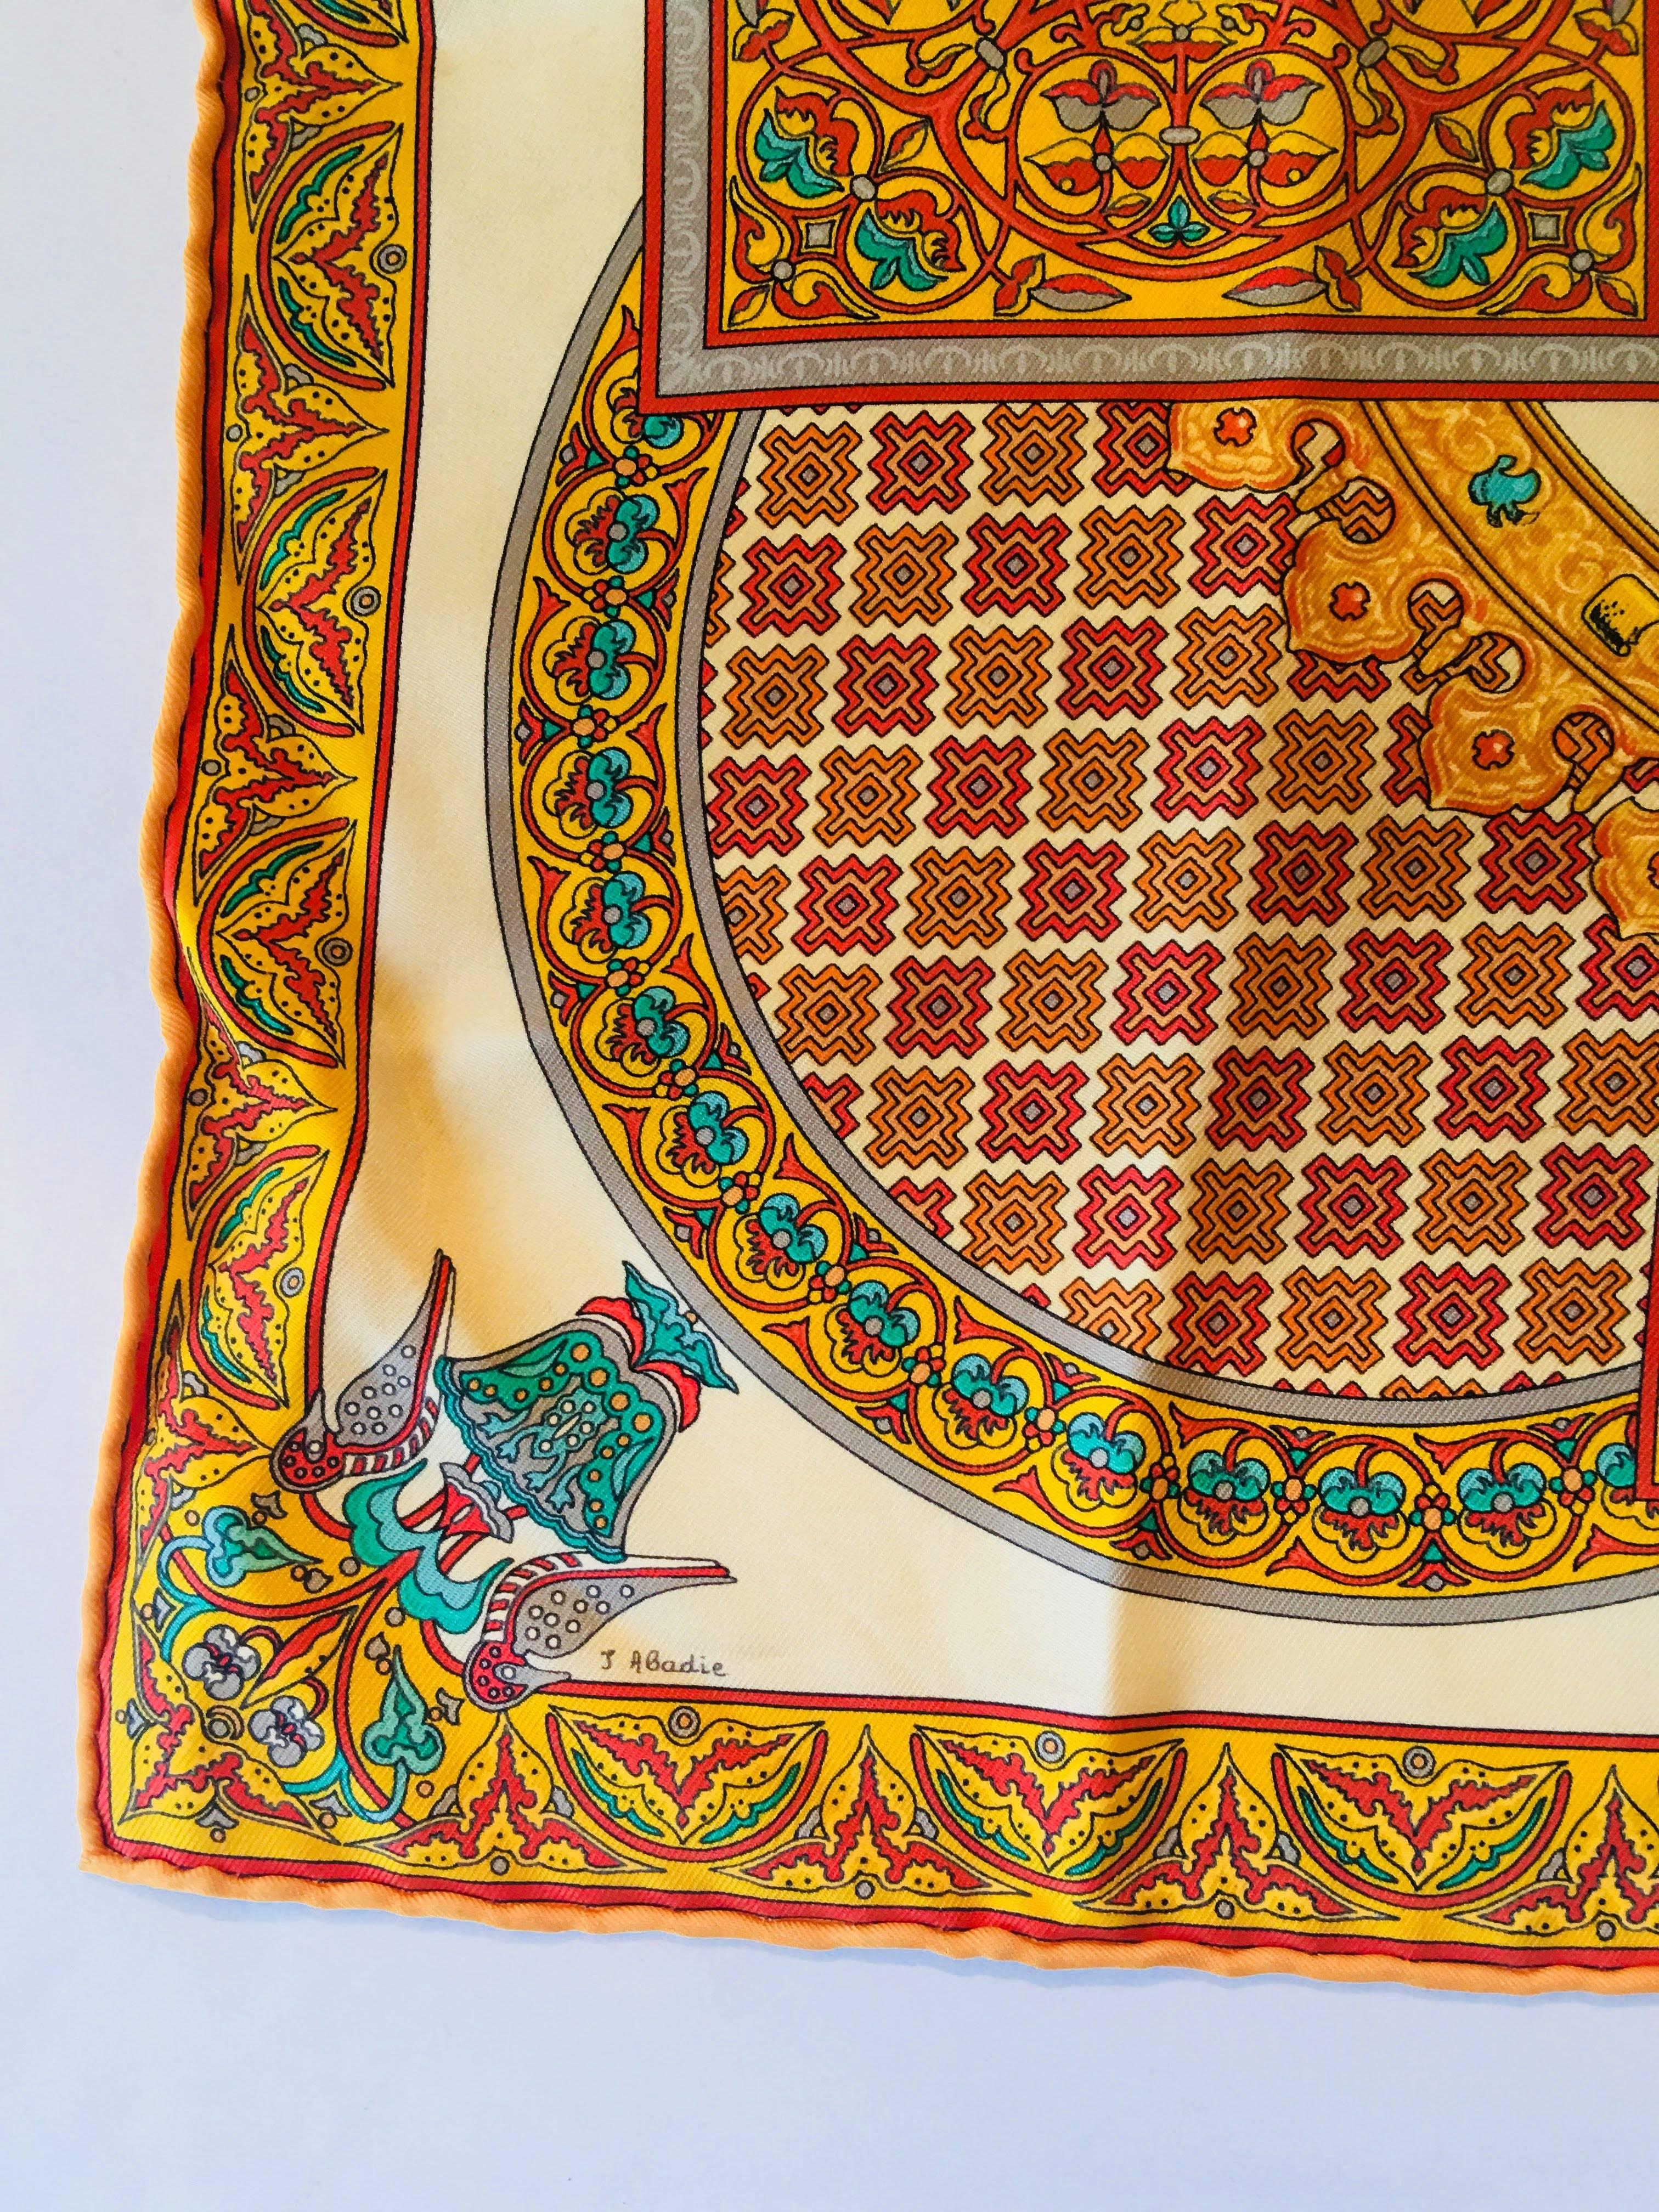 Hermes Silk Orange, Yellow, and Blue 'Celis Byzantins' Scarf with Hermes Box.